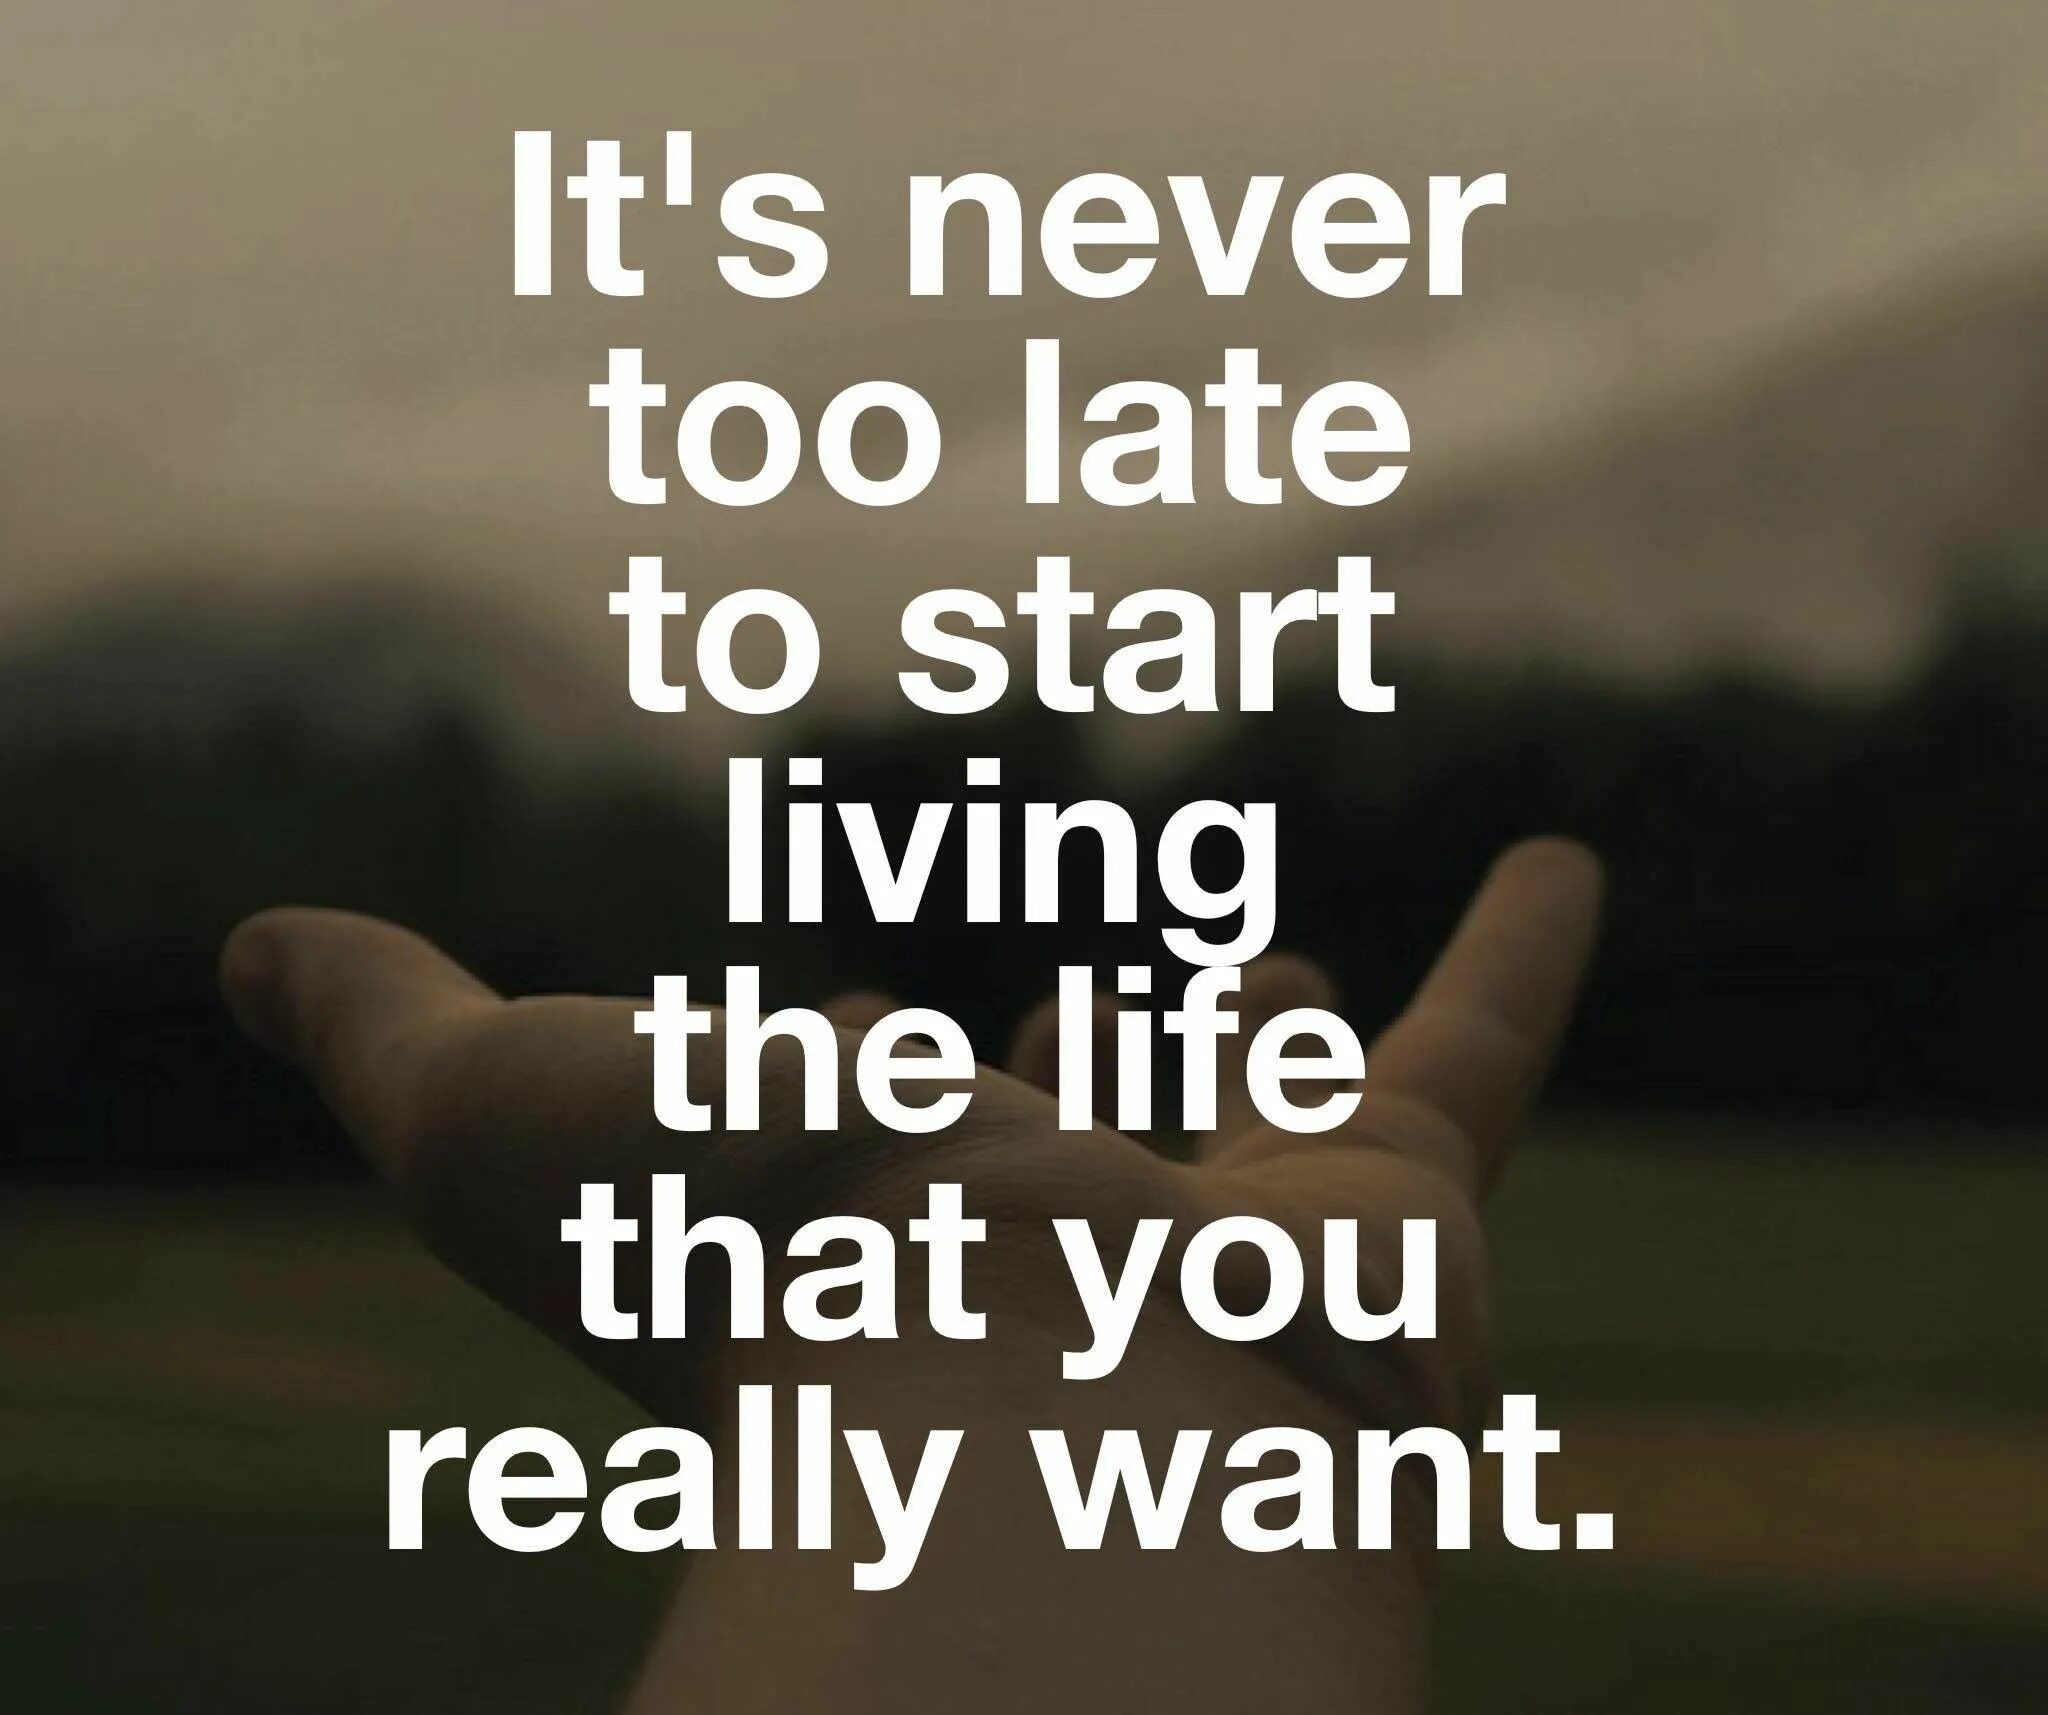 Never live up. Never too late. It is never too late. Quotes it never late. It's never too late to learn.